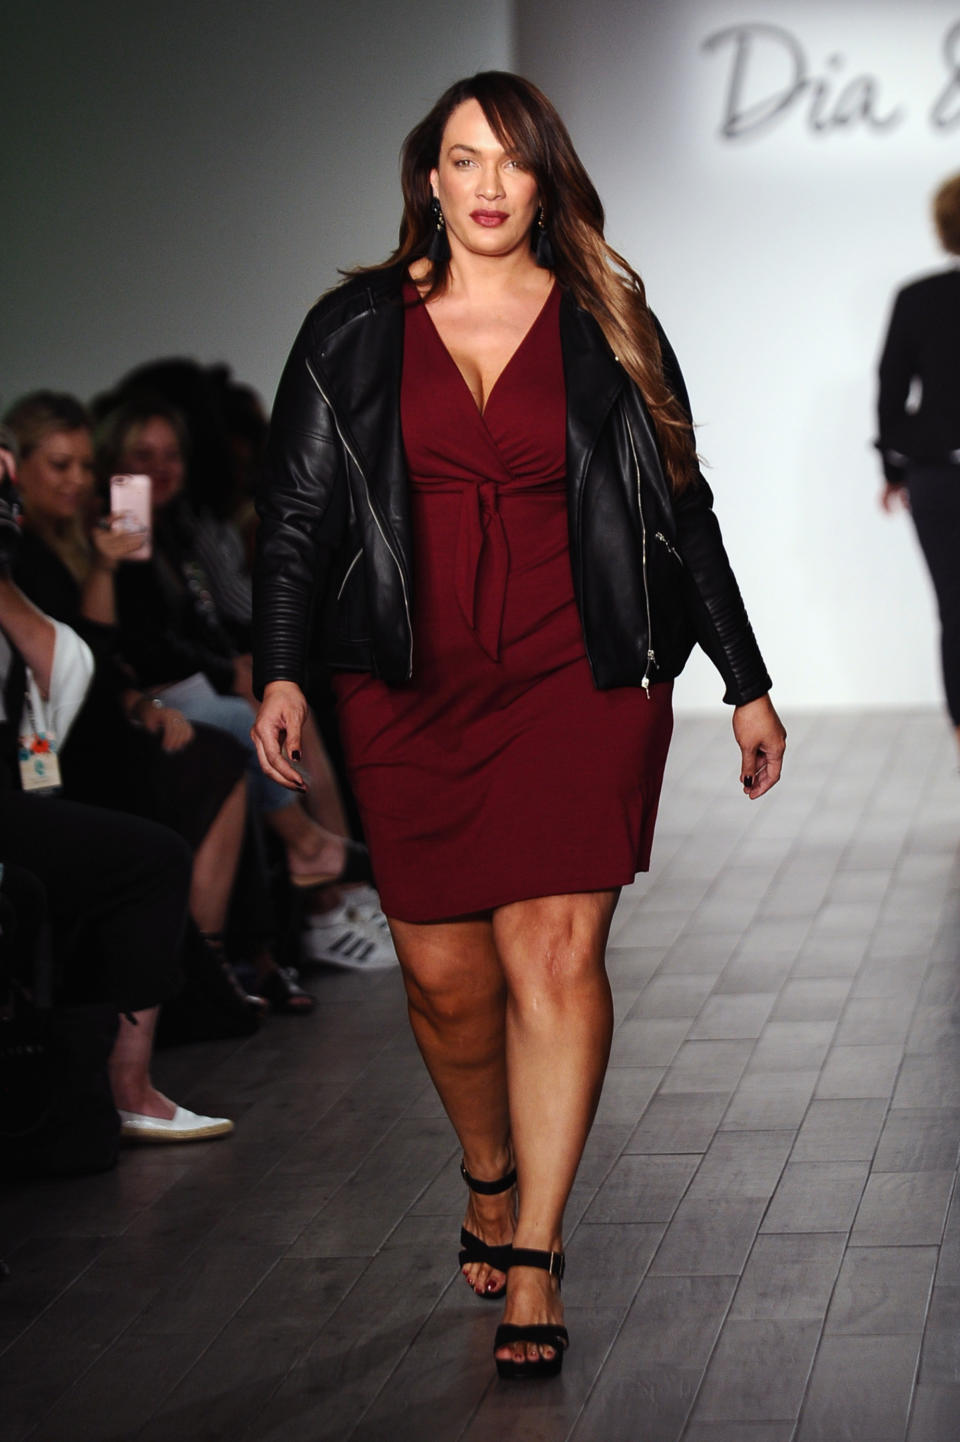 Nia Jax walks the runway during the Dia&Co fashion show and industry panel at the CURVYcon at Metropolitan Pavilion West on September 8, 2017 in New York City.